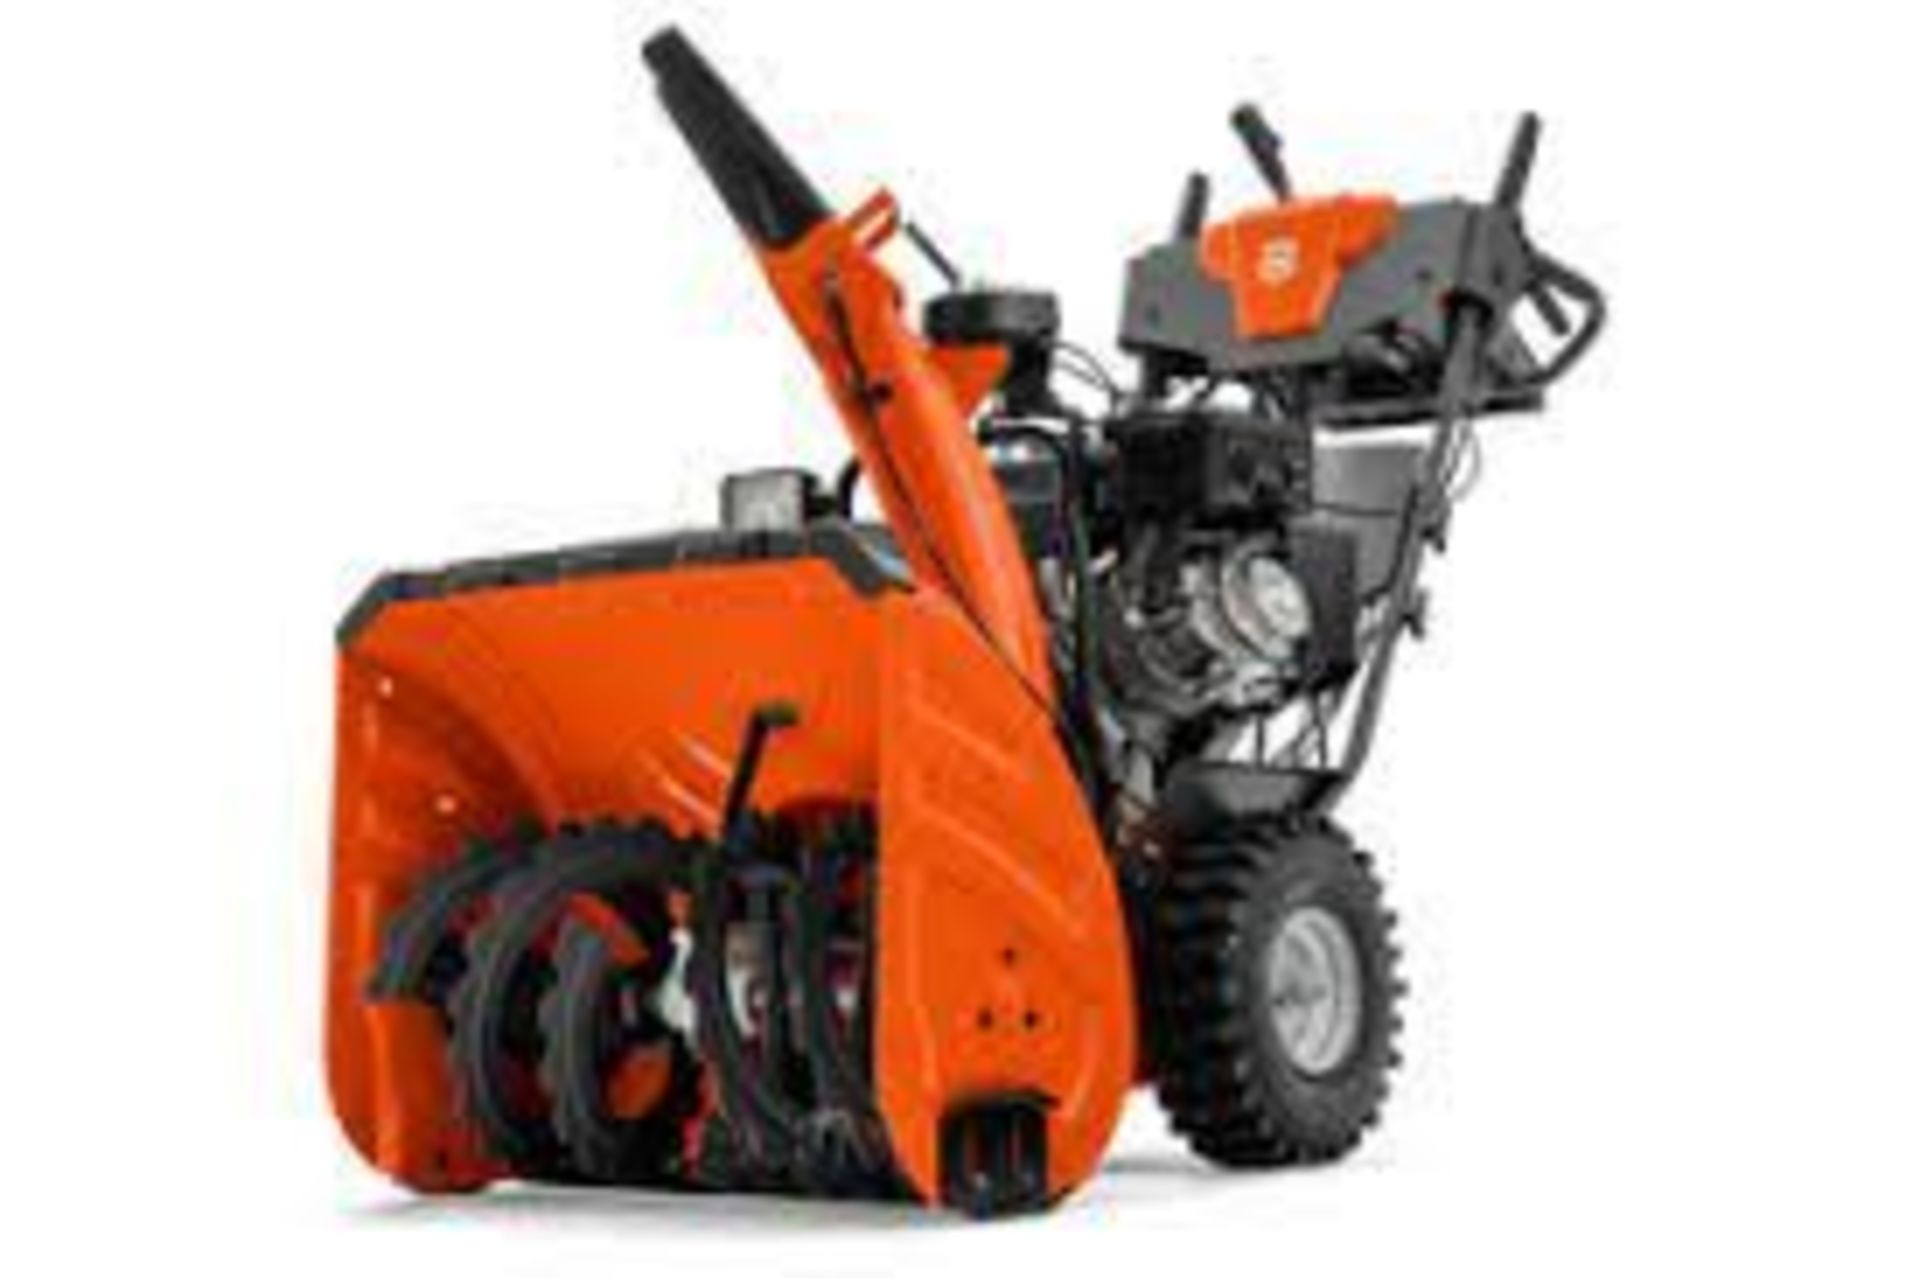 Husqvarna ST 427 Self Propelled Snow Blower - Approx MSRP $2399 - Image 2 of 5